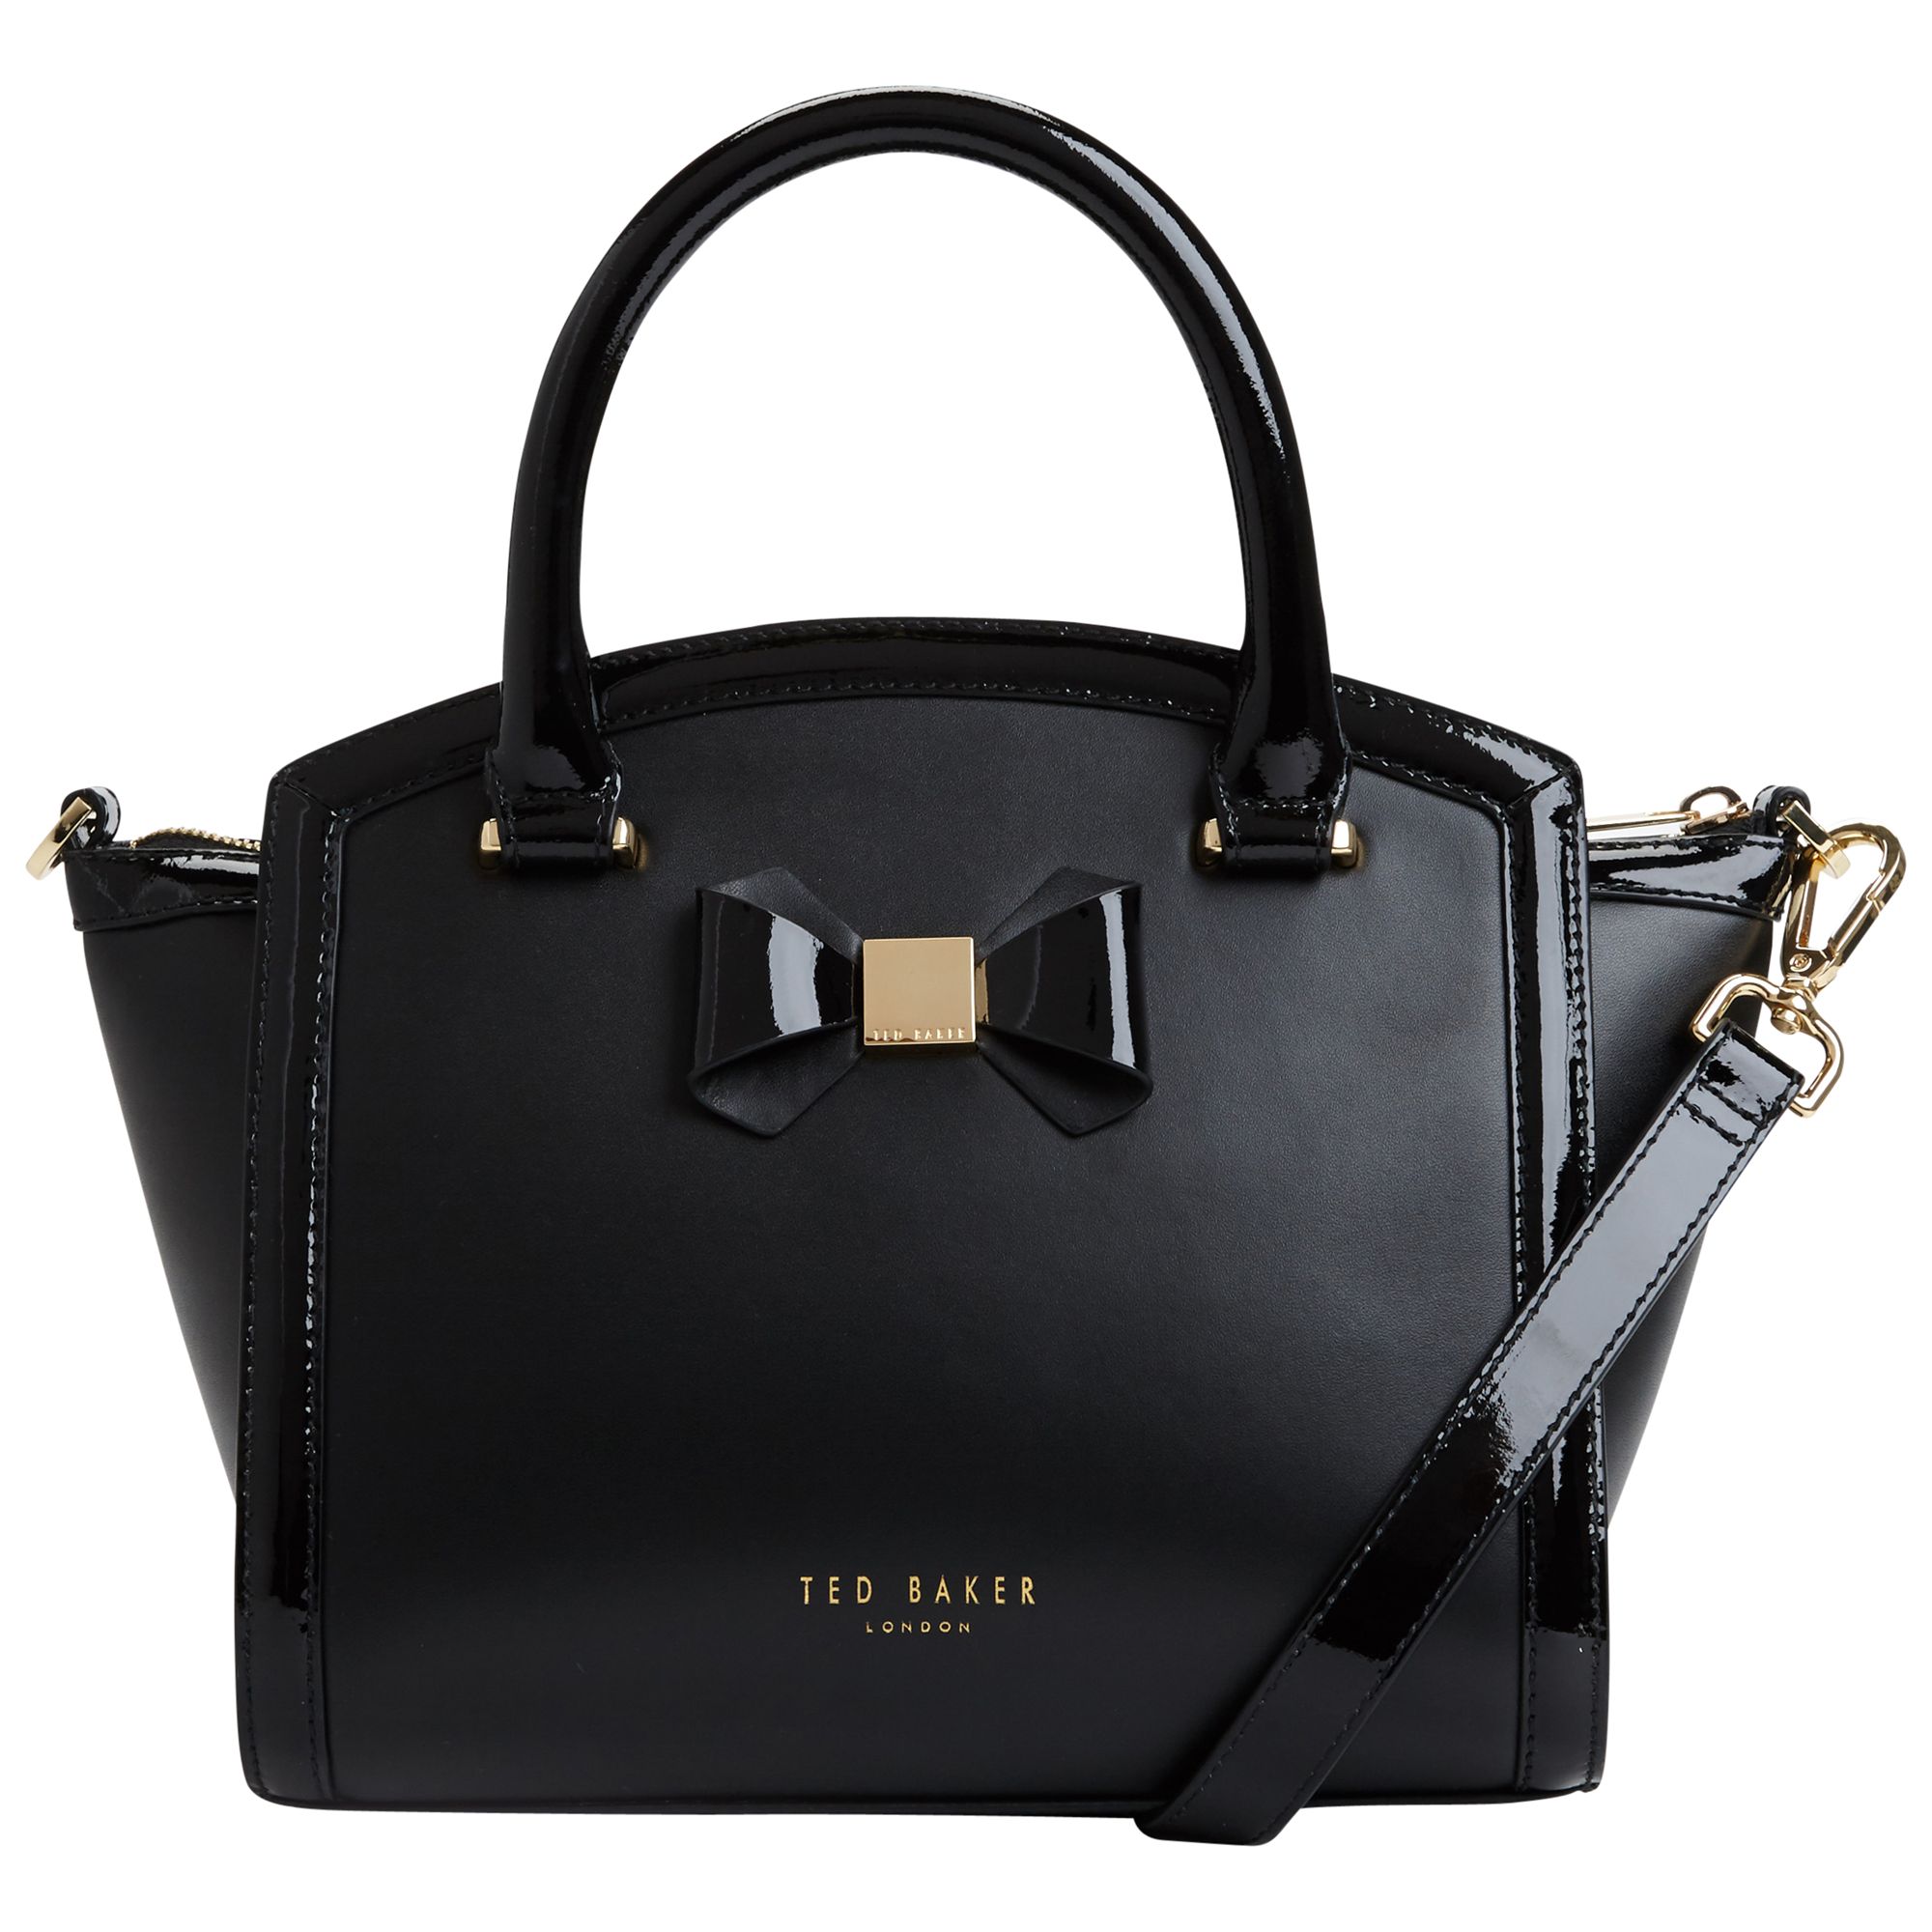 Ted Baker Curved Top Bow Leather Tote Bag